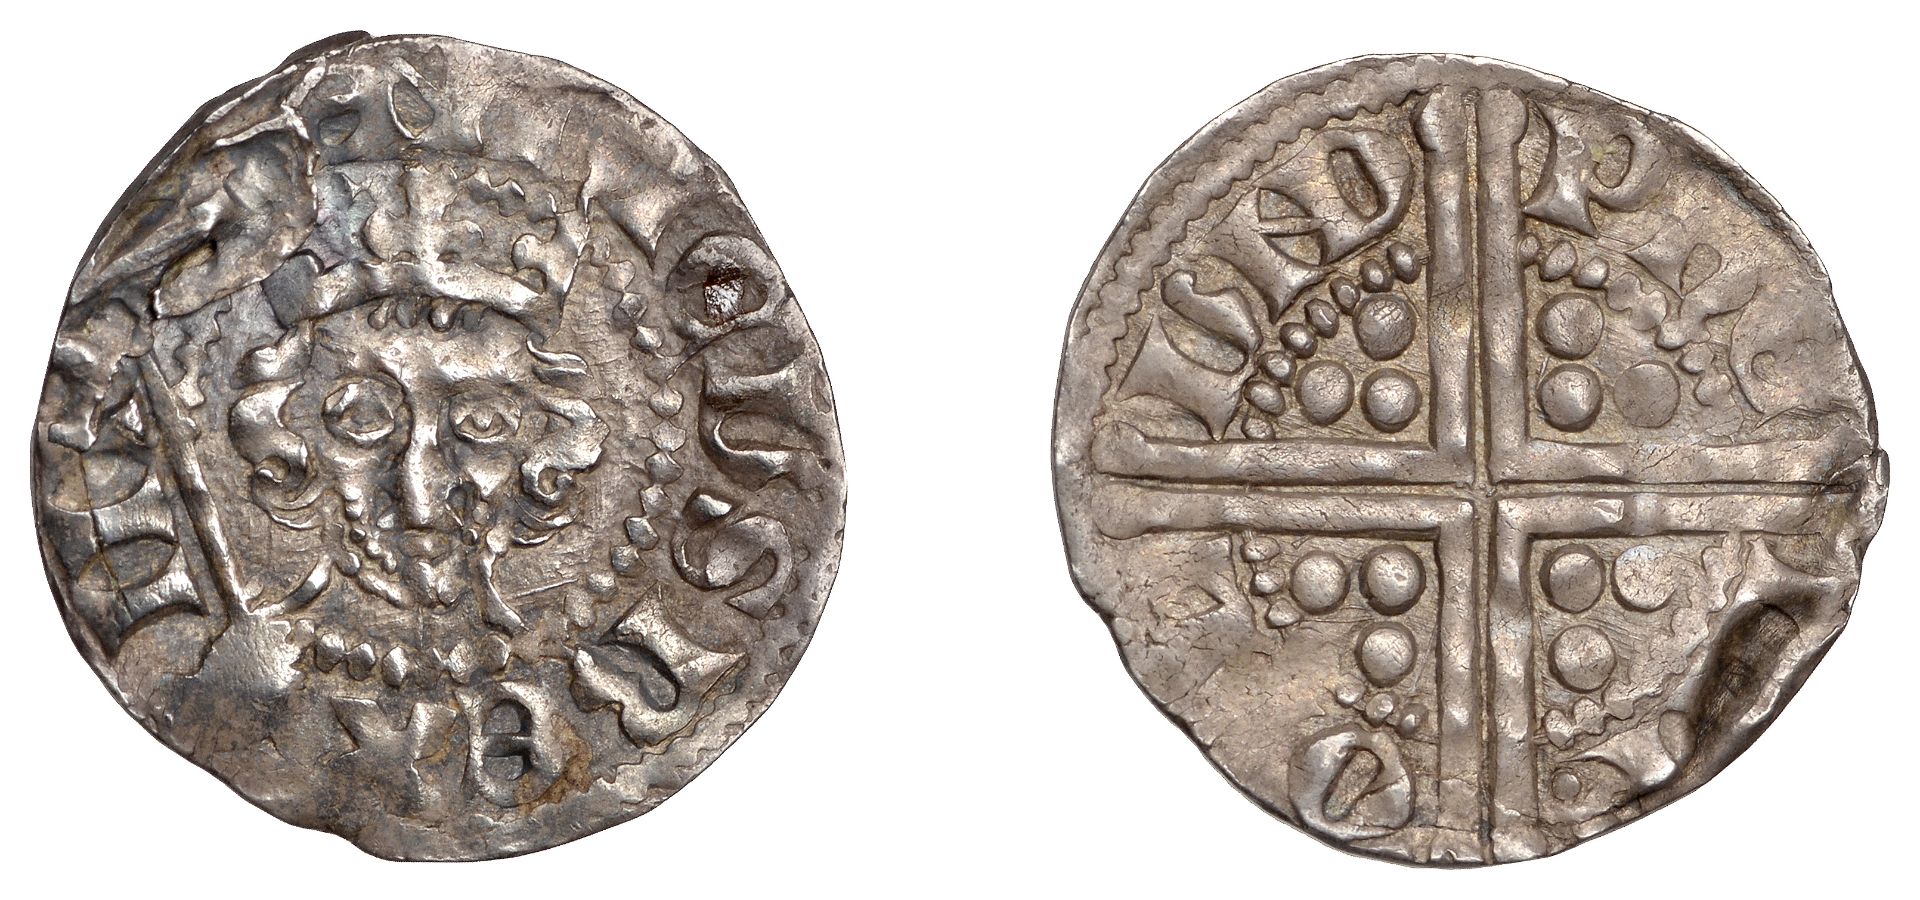 Long Cross coinage, Penny, class VII, London, Philip, phelip on lvnd, 1.48g/9h (N 1002; S 13...